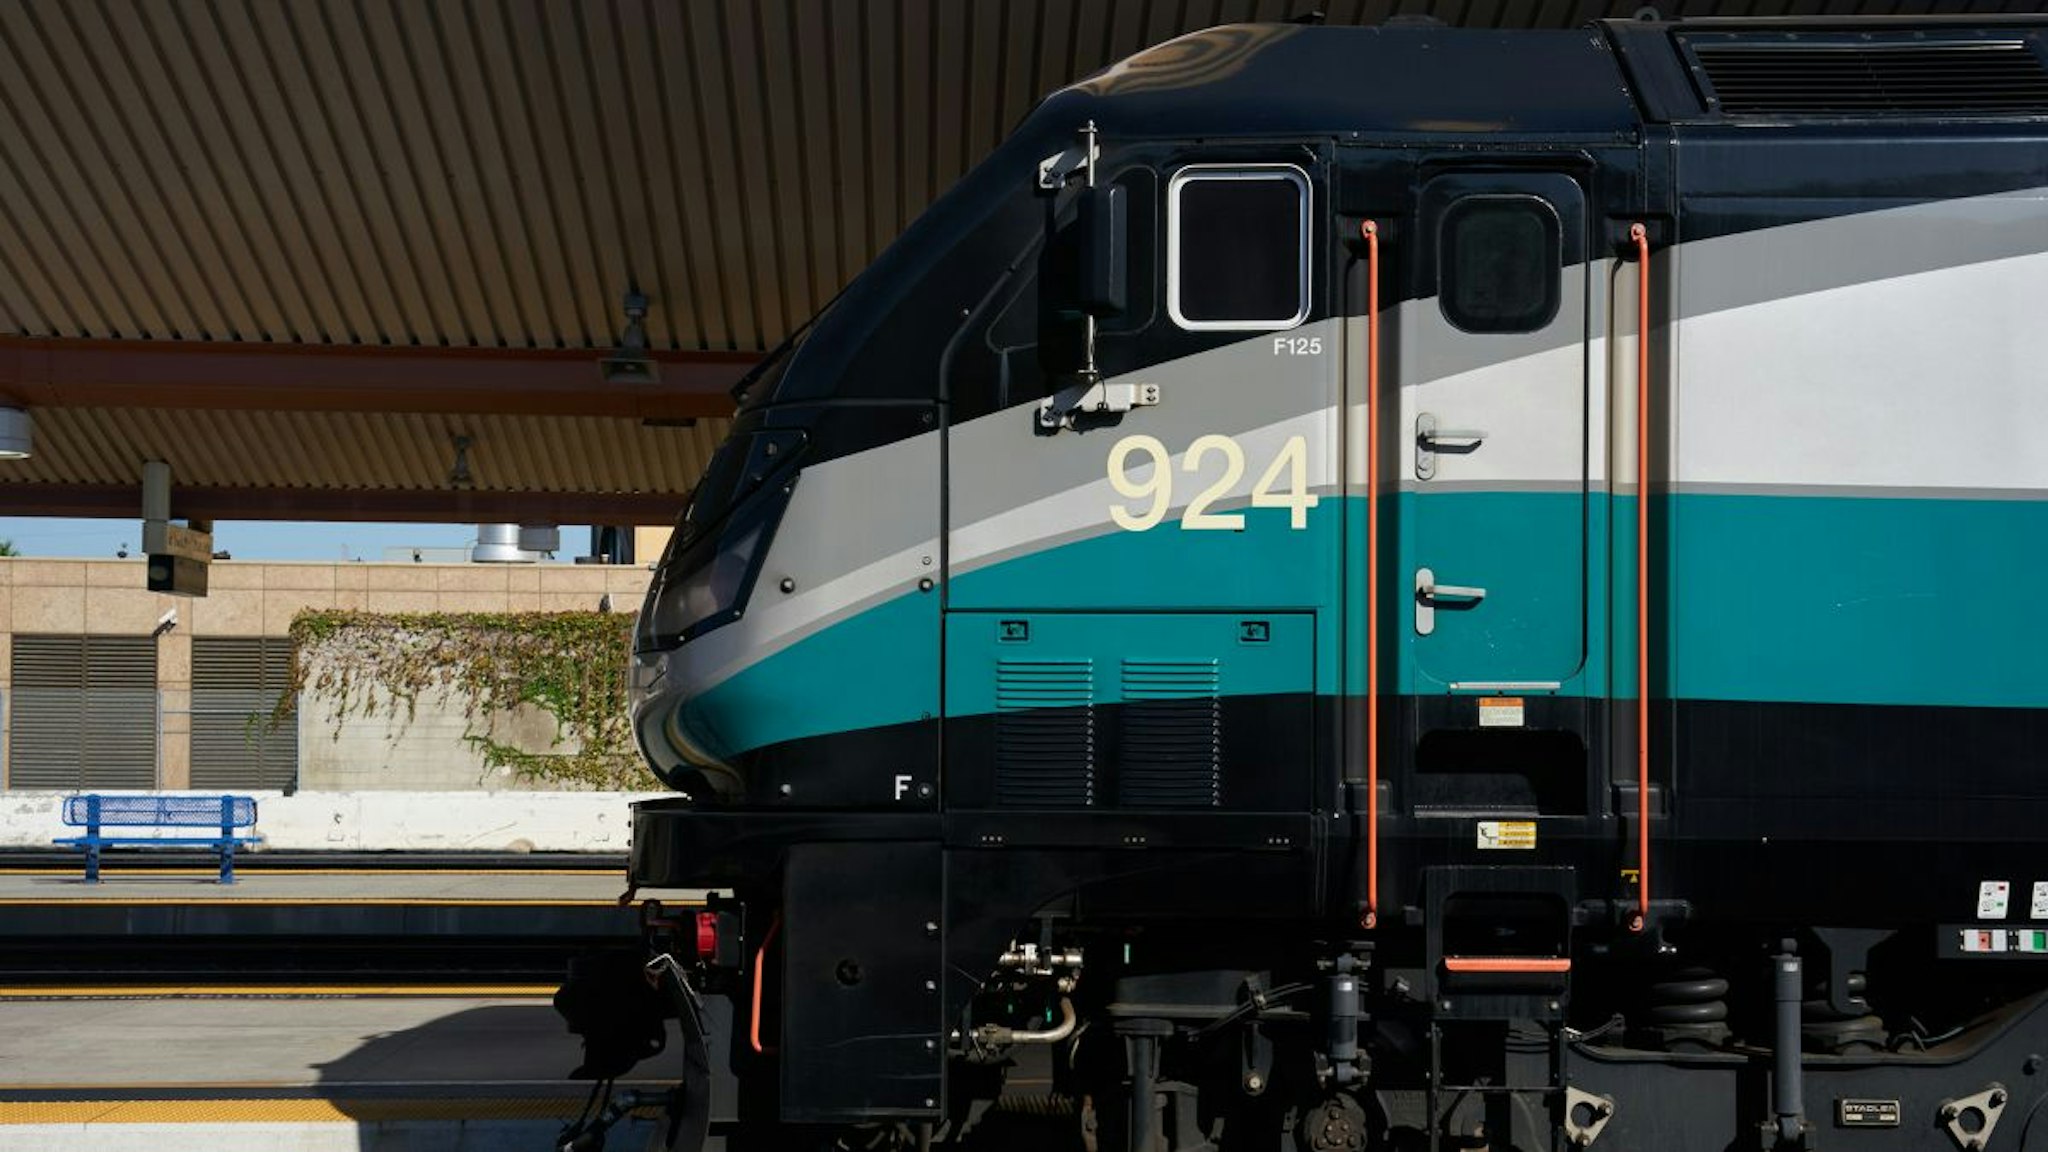 A Metrolink commuter train at LA Union Station in Los Angeles, California, US on Wednesday, Sept. 14, 2022. Railroads and unions have until Friday to resolve a labor dispute that risks a crippling shutdown of the nations freight-rail network, wreaking havoc on the US economy.